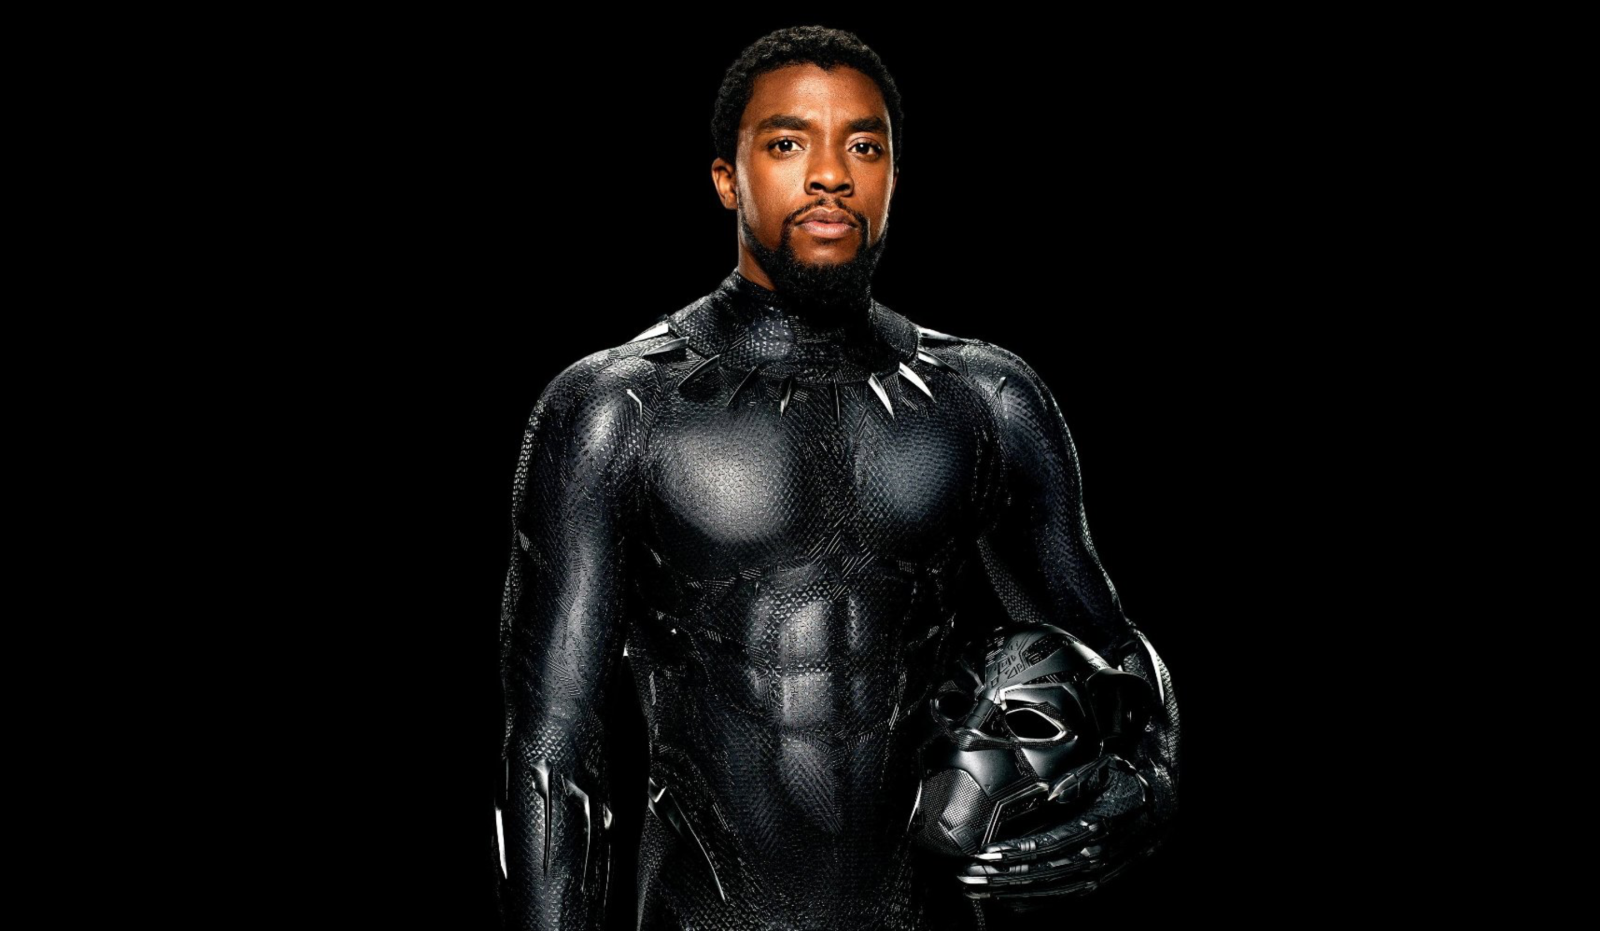 Illustration for article titled Chadwick Boseman, star of Black Panther, dies at age 43